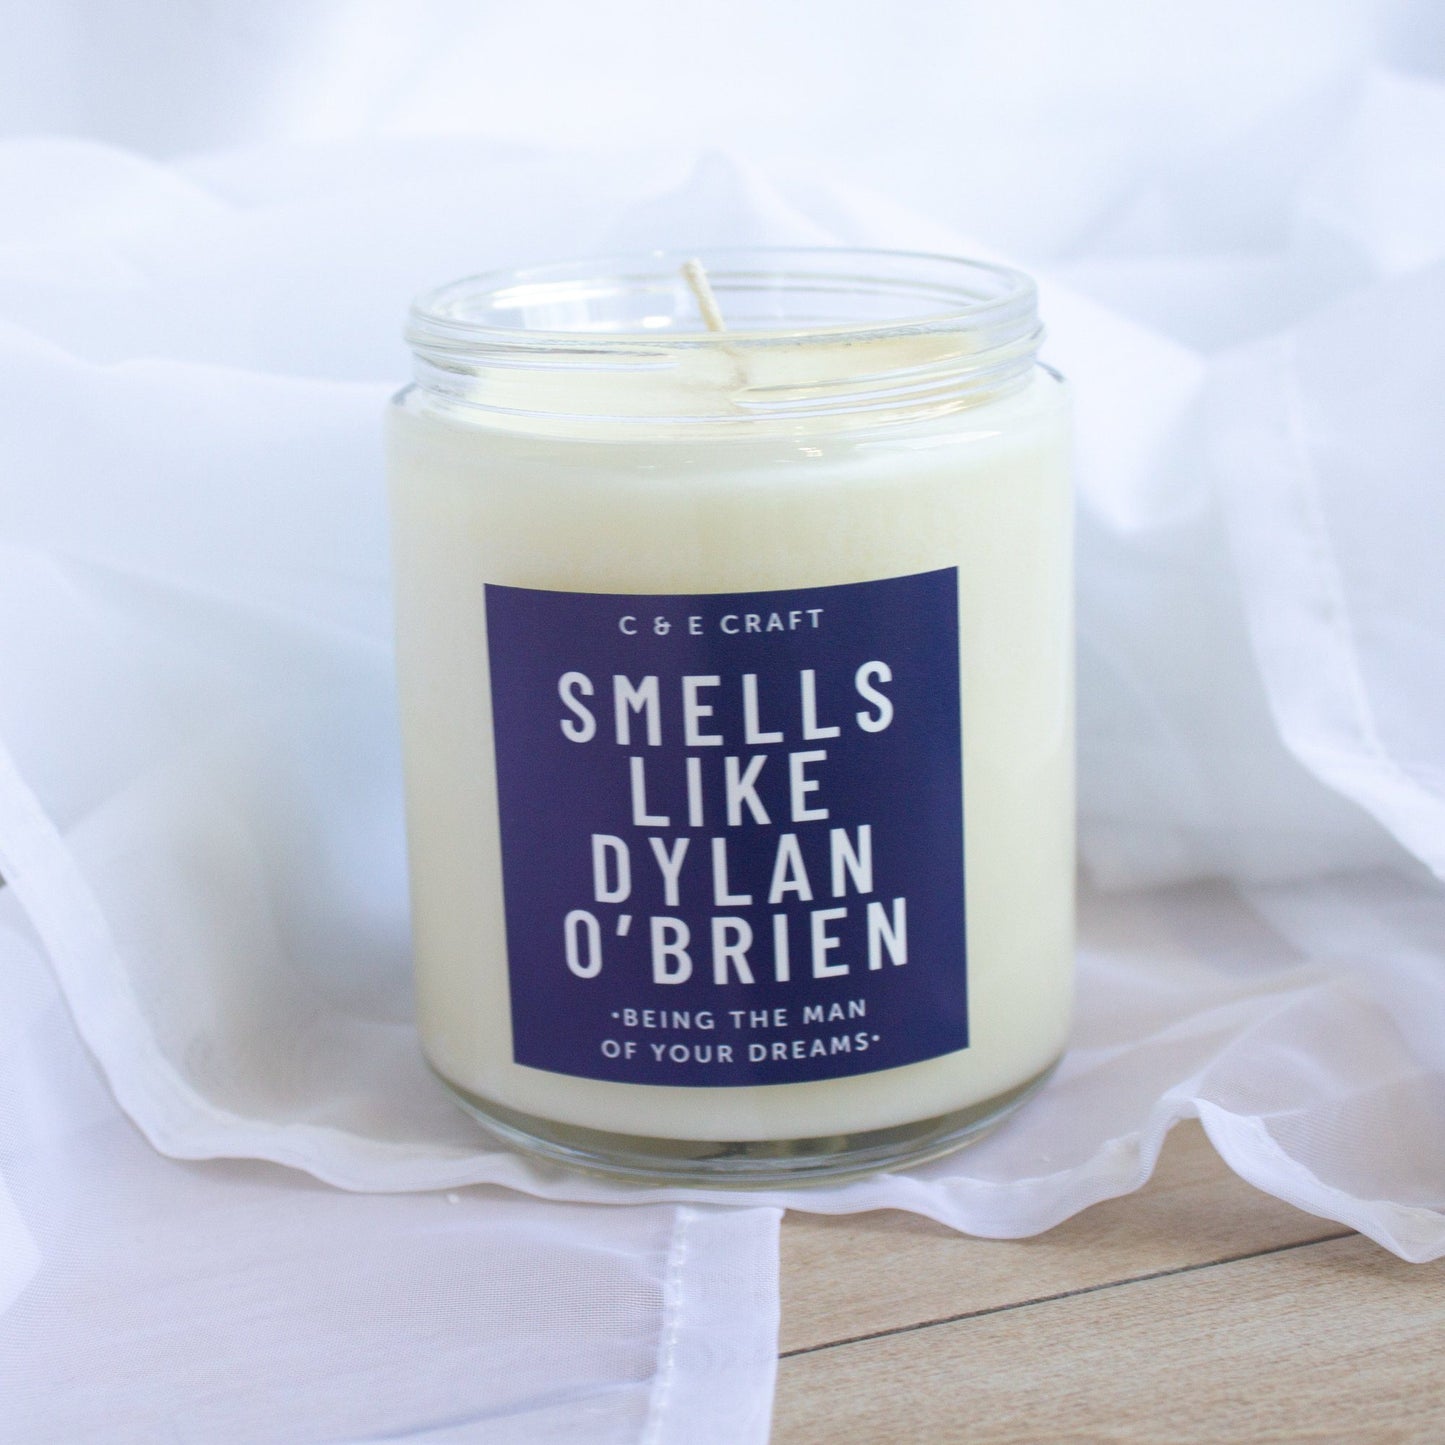 C&E - Smells Like Dylan O'Brien Soy Wax Candle - Smells Like Candle - Gift for Her C & E Craft Co 